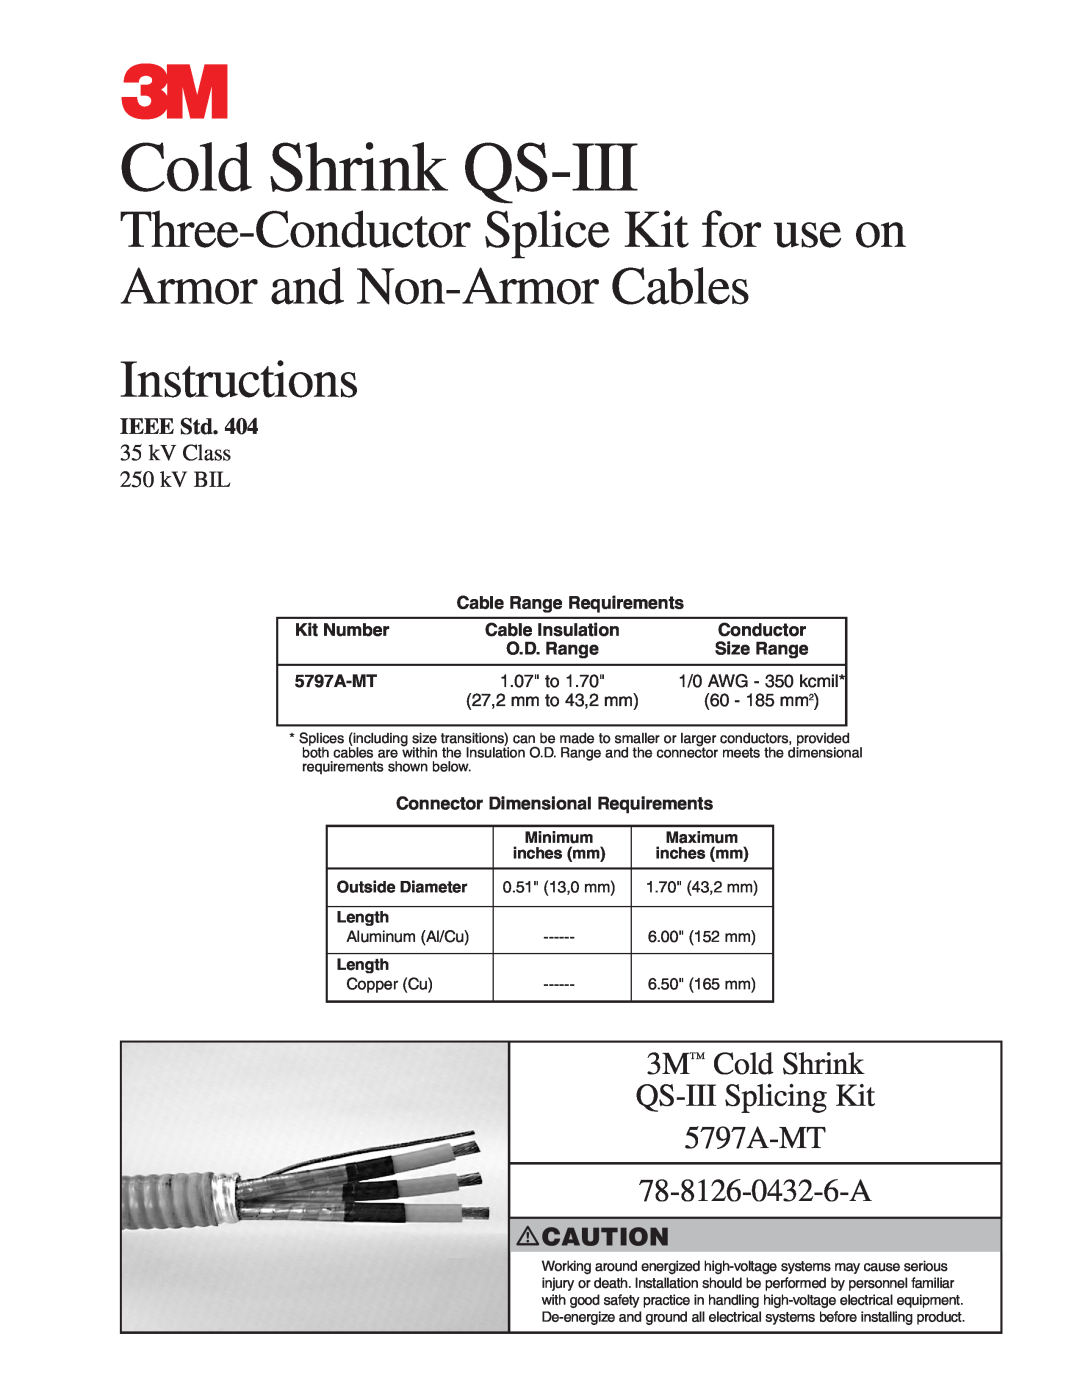 3M manual Instructions, 3M Cold Shrink QS-IIISplicing Kit 5797A-MT, 78-8126-0432-6-A, Cable Range Requirements 